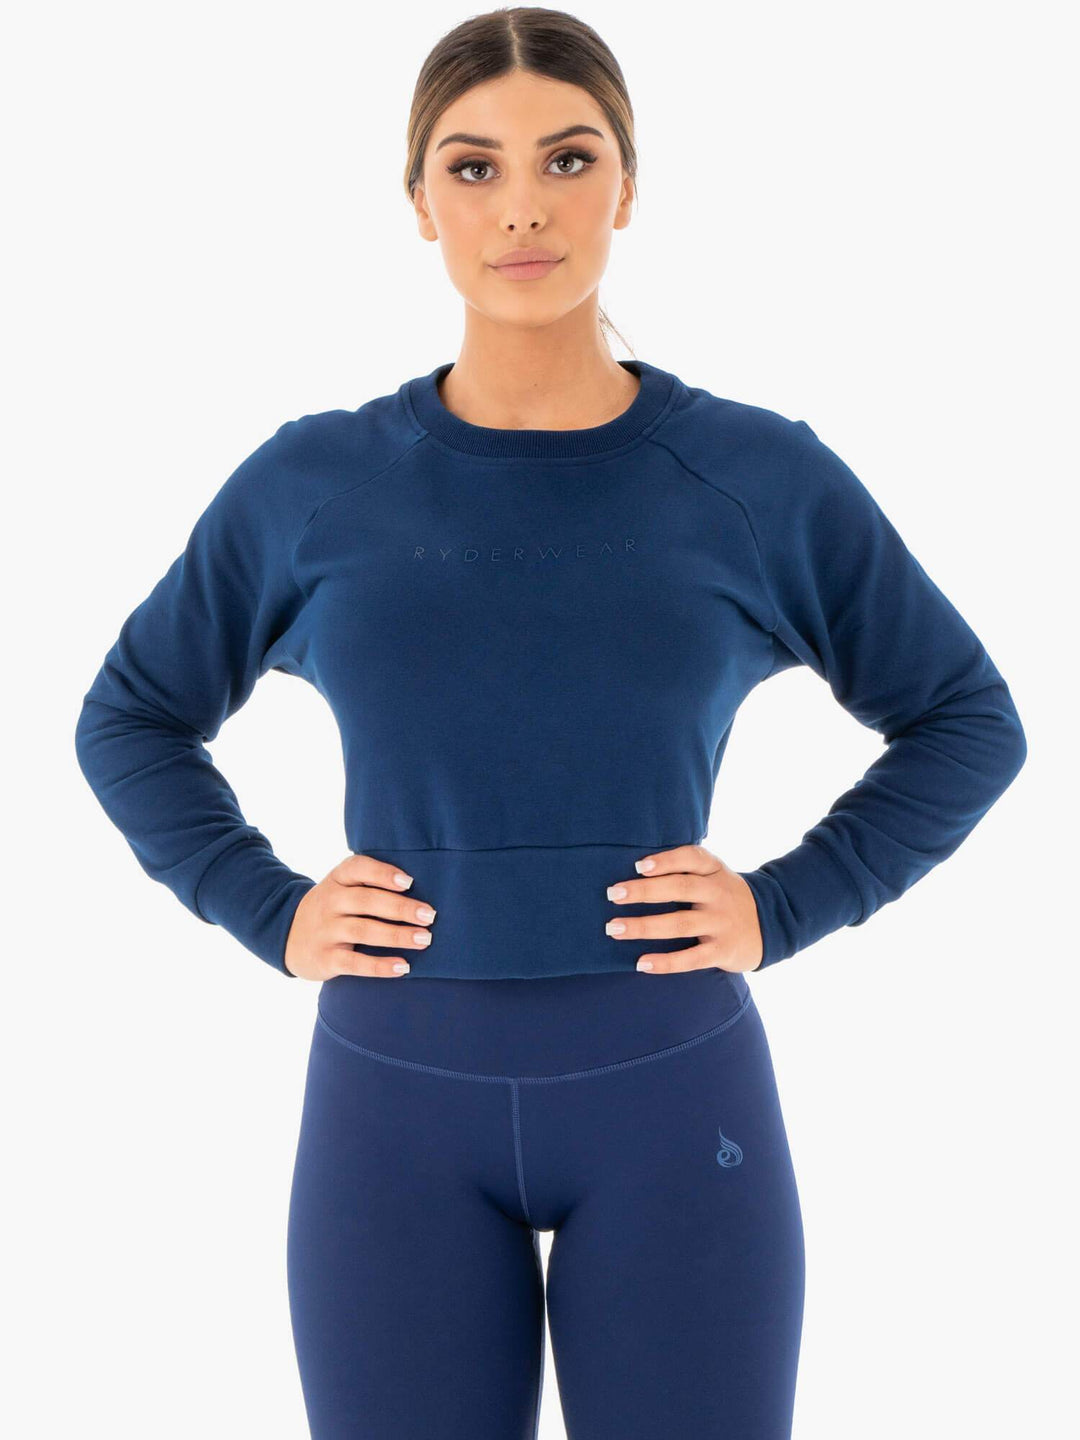 Motion Sweater - Navy Clothing Ryderwear 